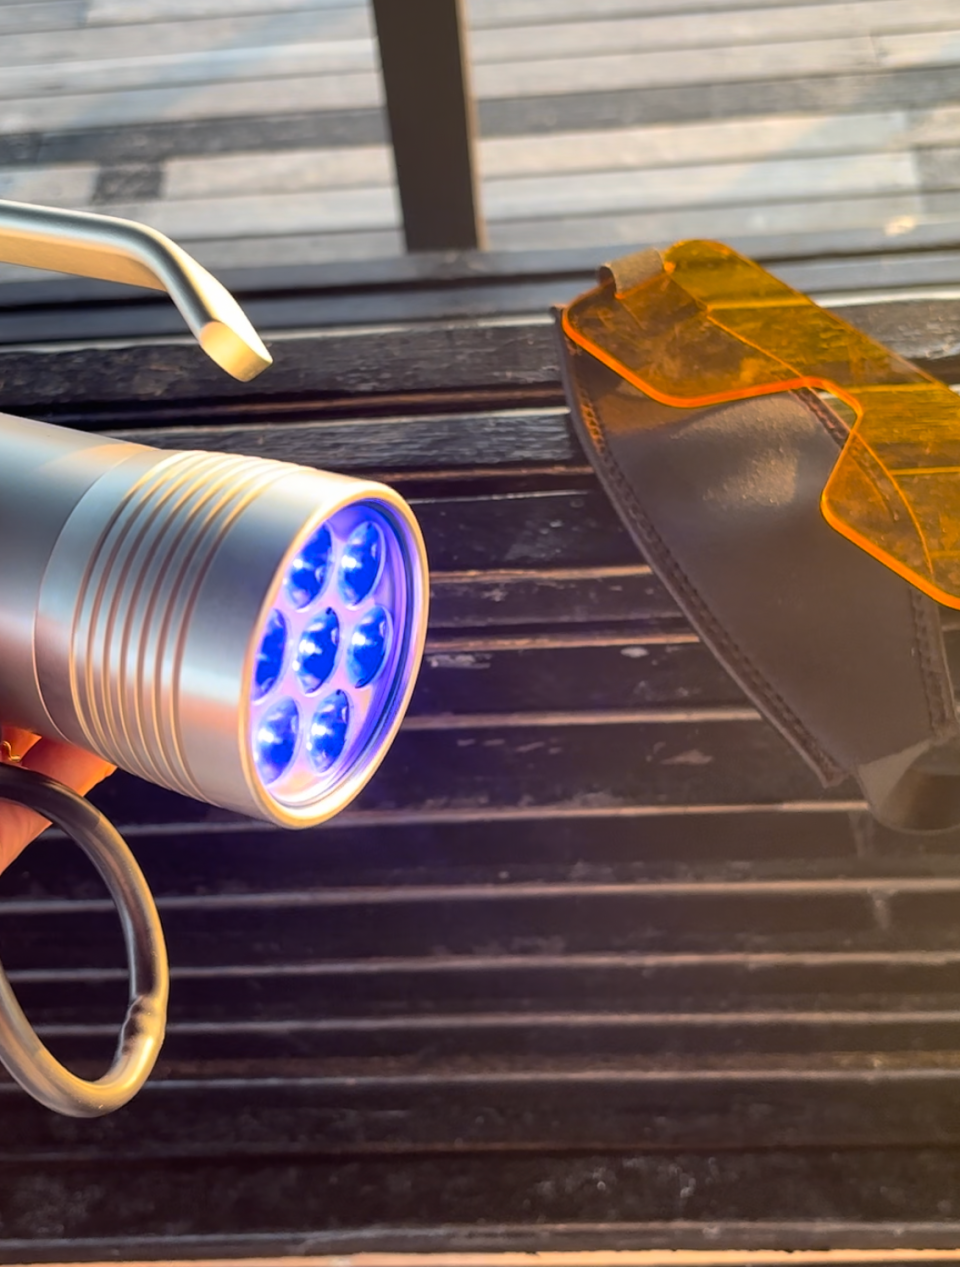 The orange filter and blue light flashlight help anenomes and coral light up in neon colors.